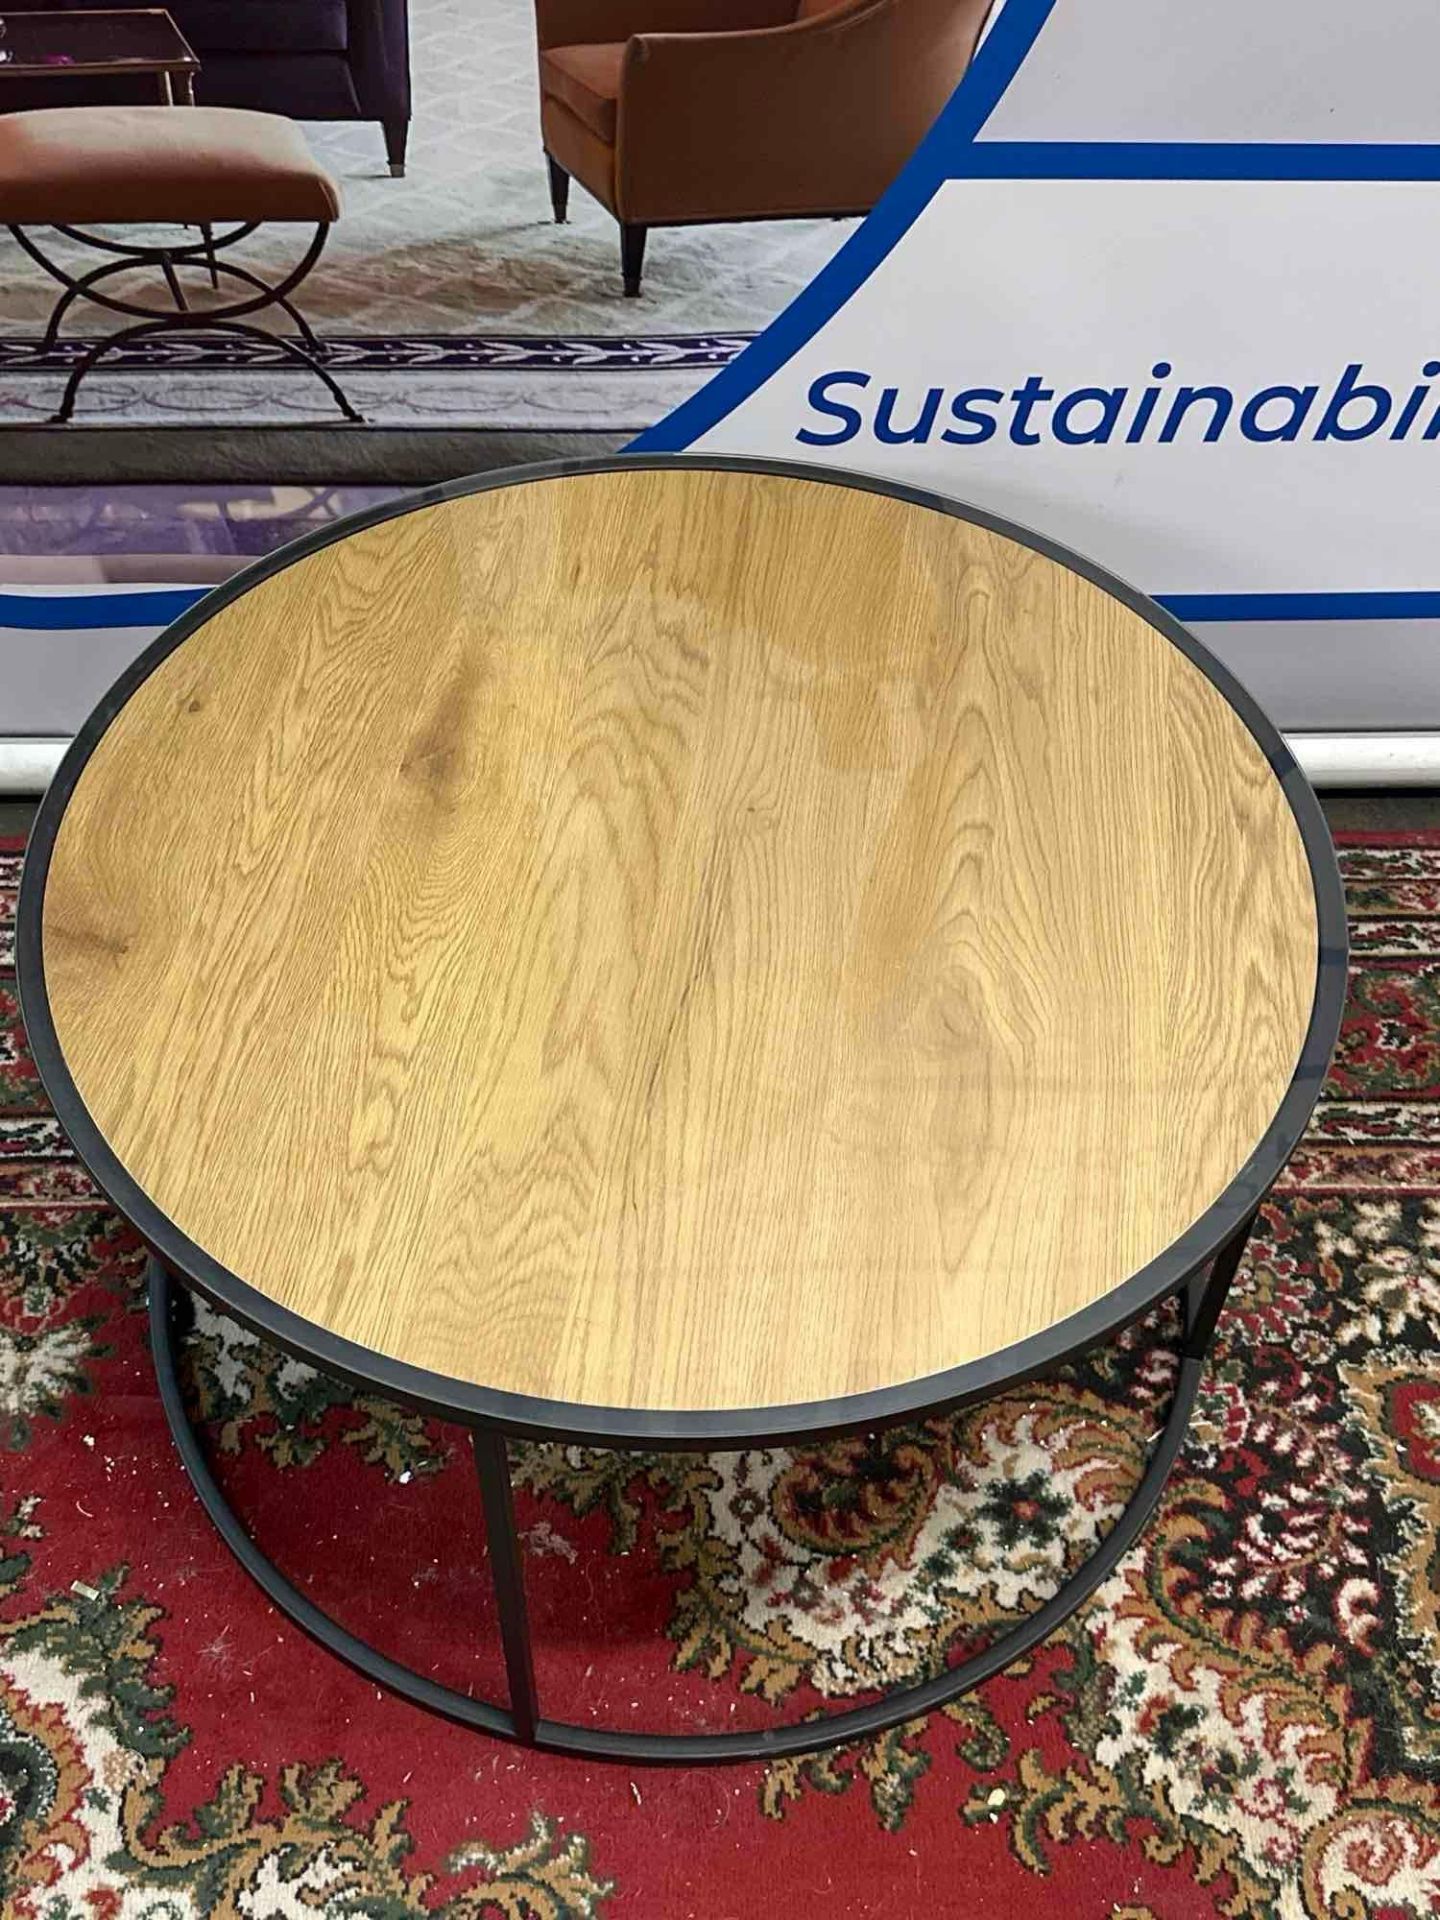 Modern Industrial Style Coffee Table Contemporary Design With A Scandinavian Feel That Would Look - Image 2 of 3